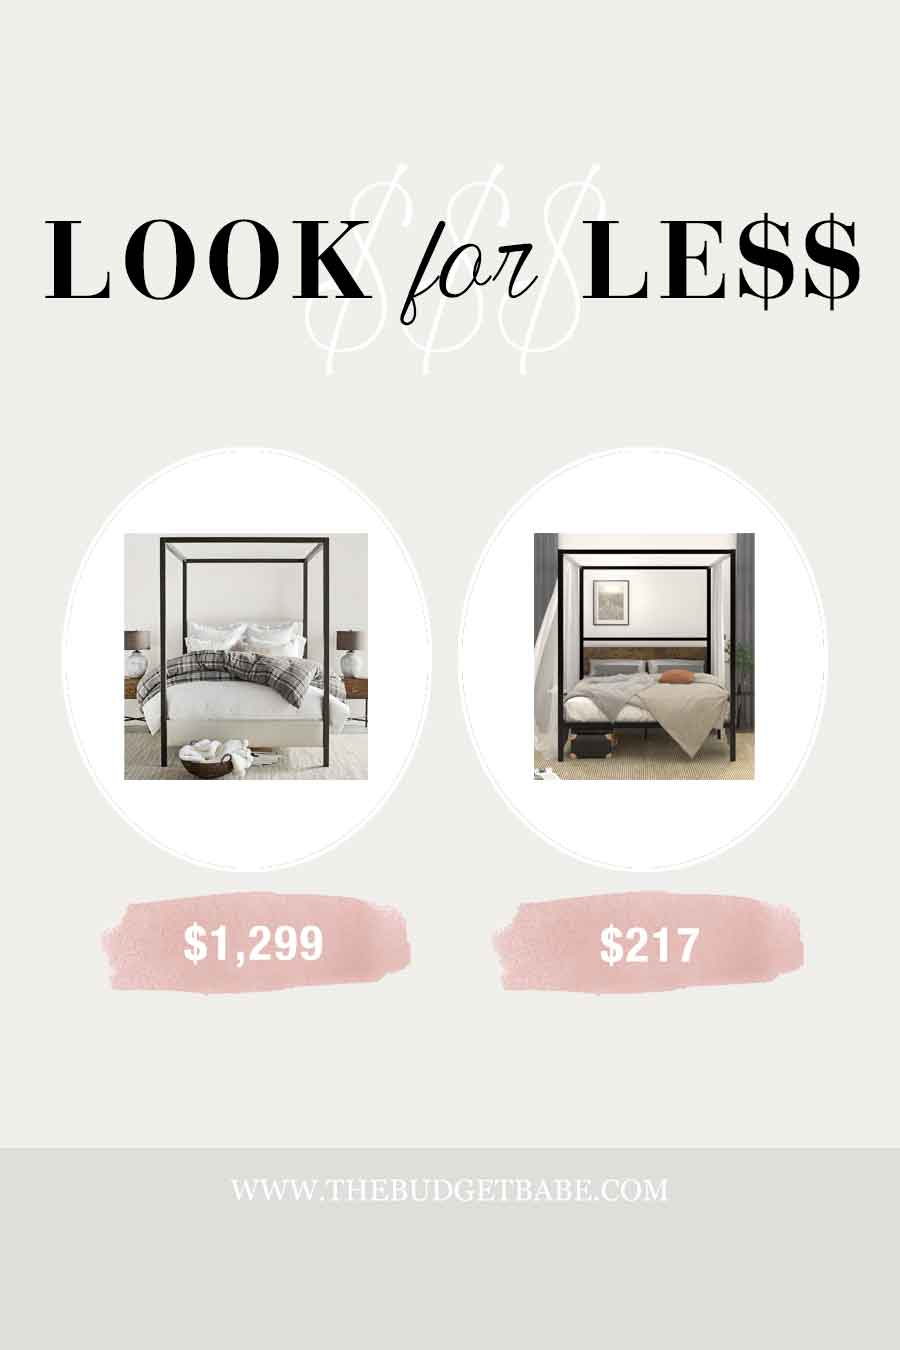 Pottery Barn canopy bed look for less